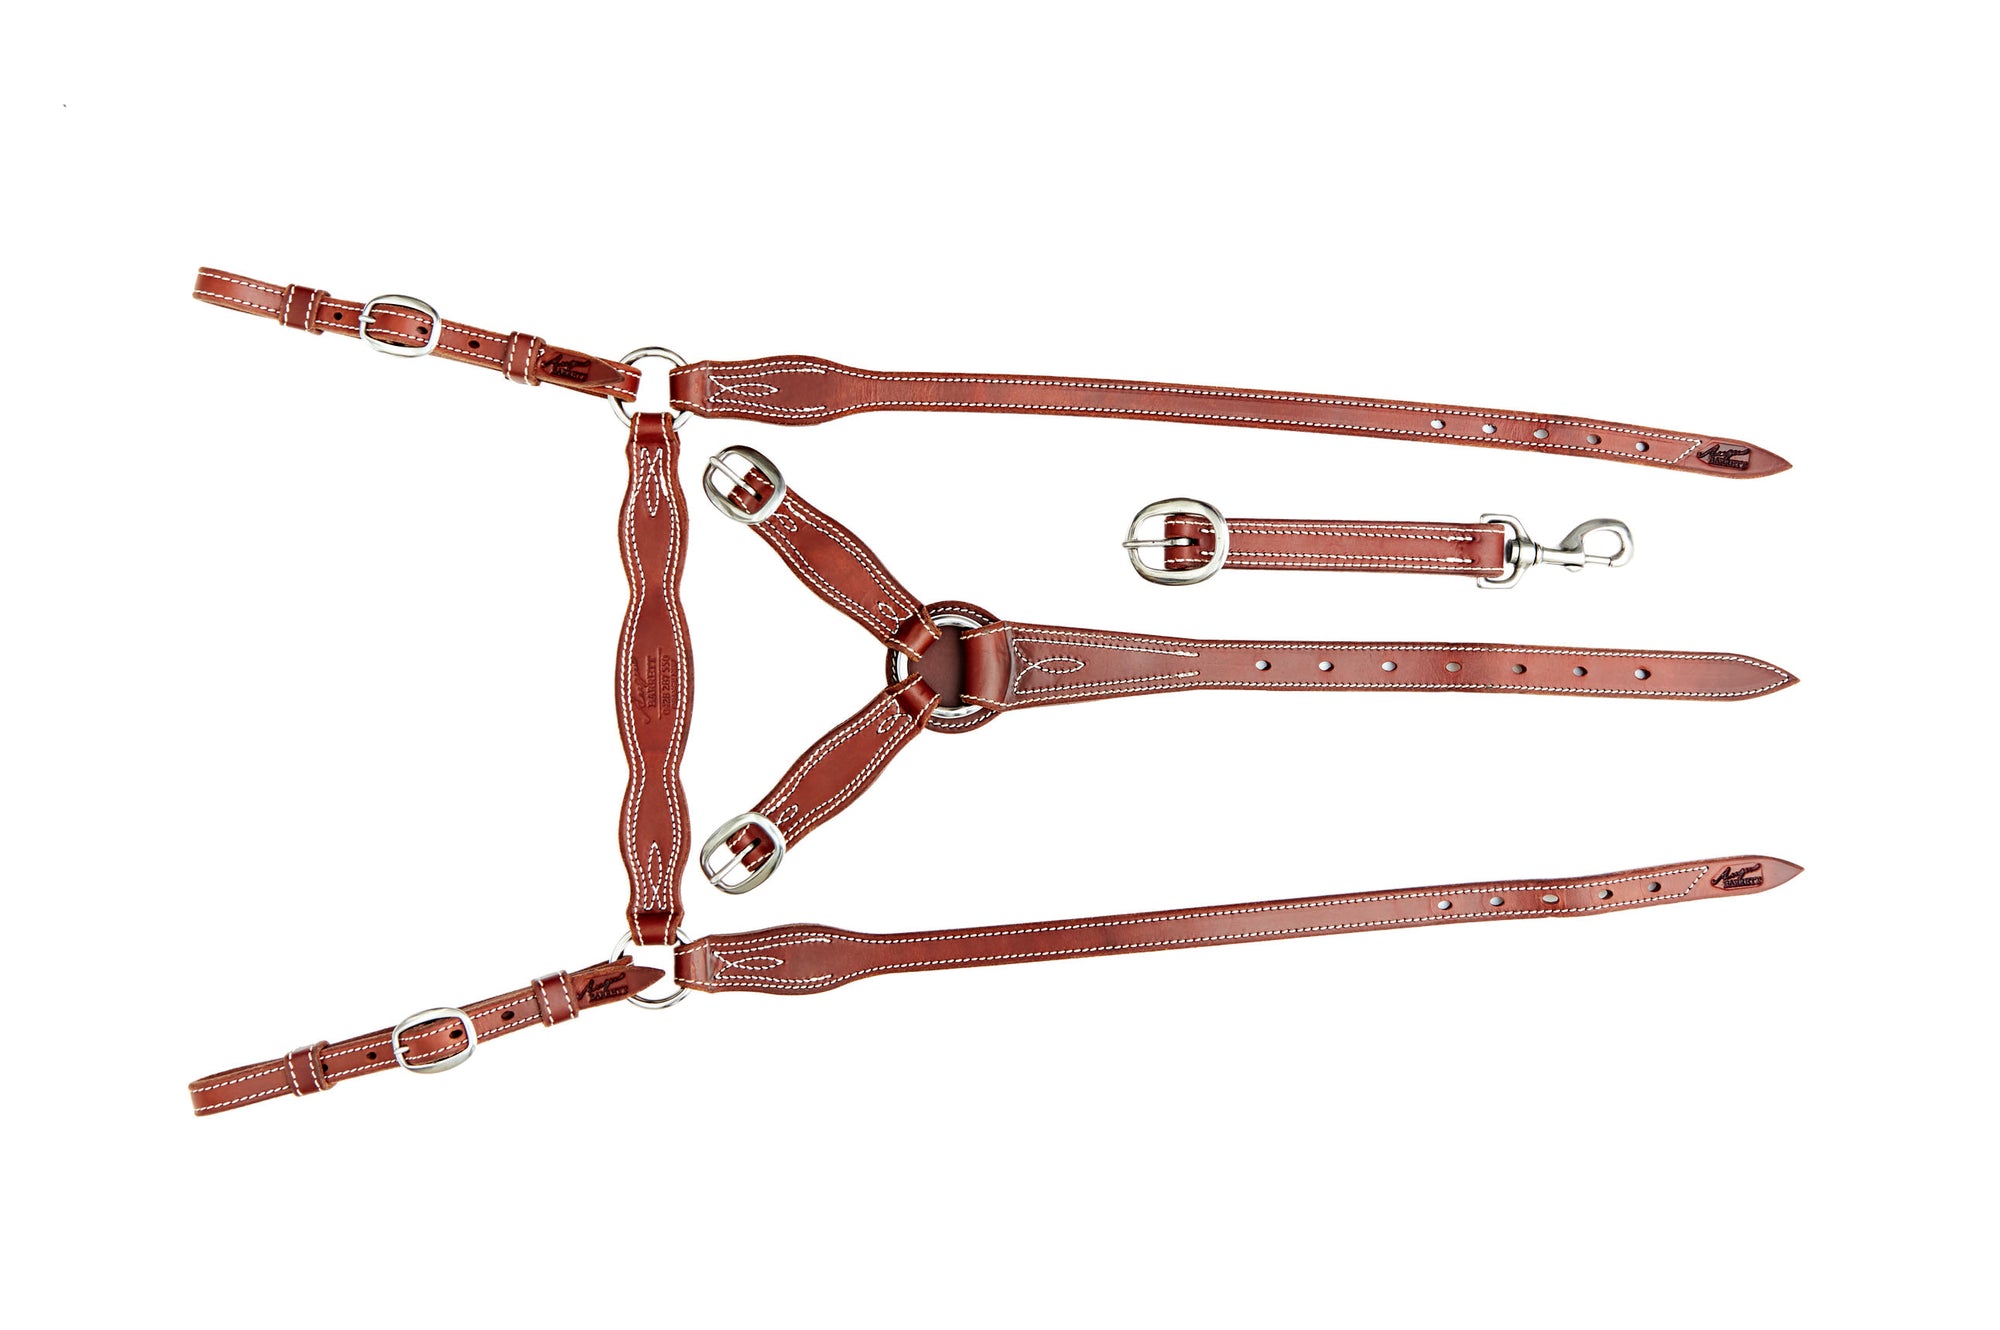 Angus Barrett Saddlery Station Breastplate - Natural Leather with Brass Hardware - Fully Stitched